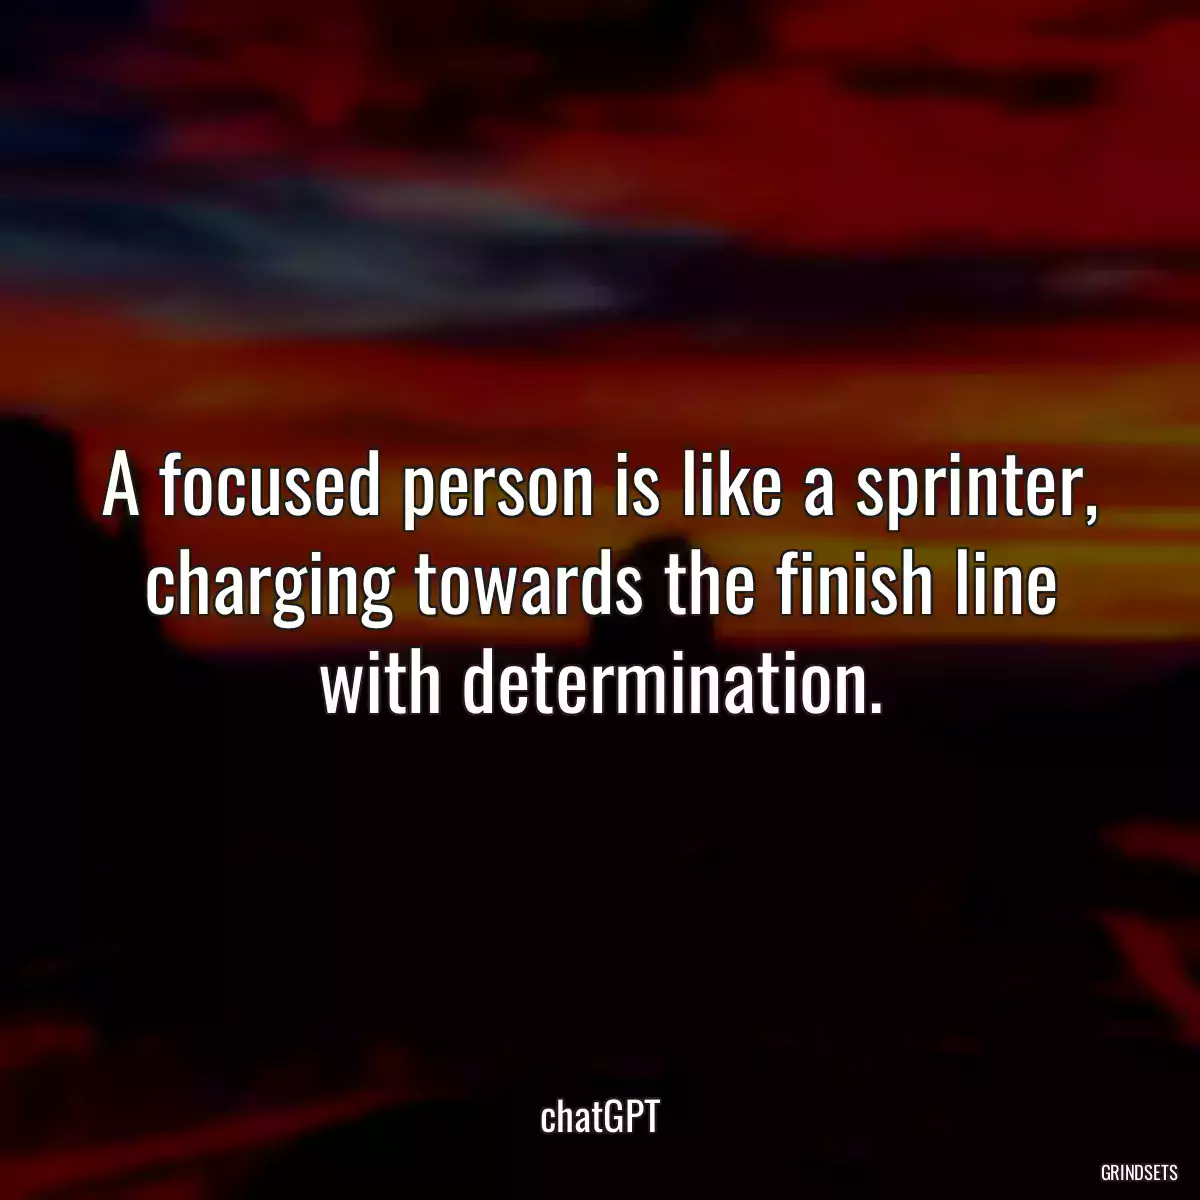 A focused person is like a sprinter, charging towards the finish line with determination.